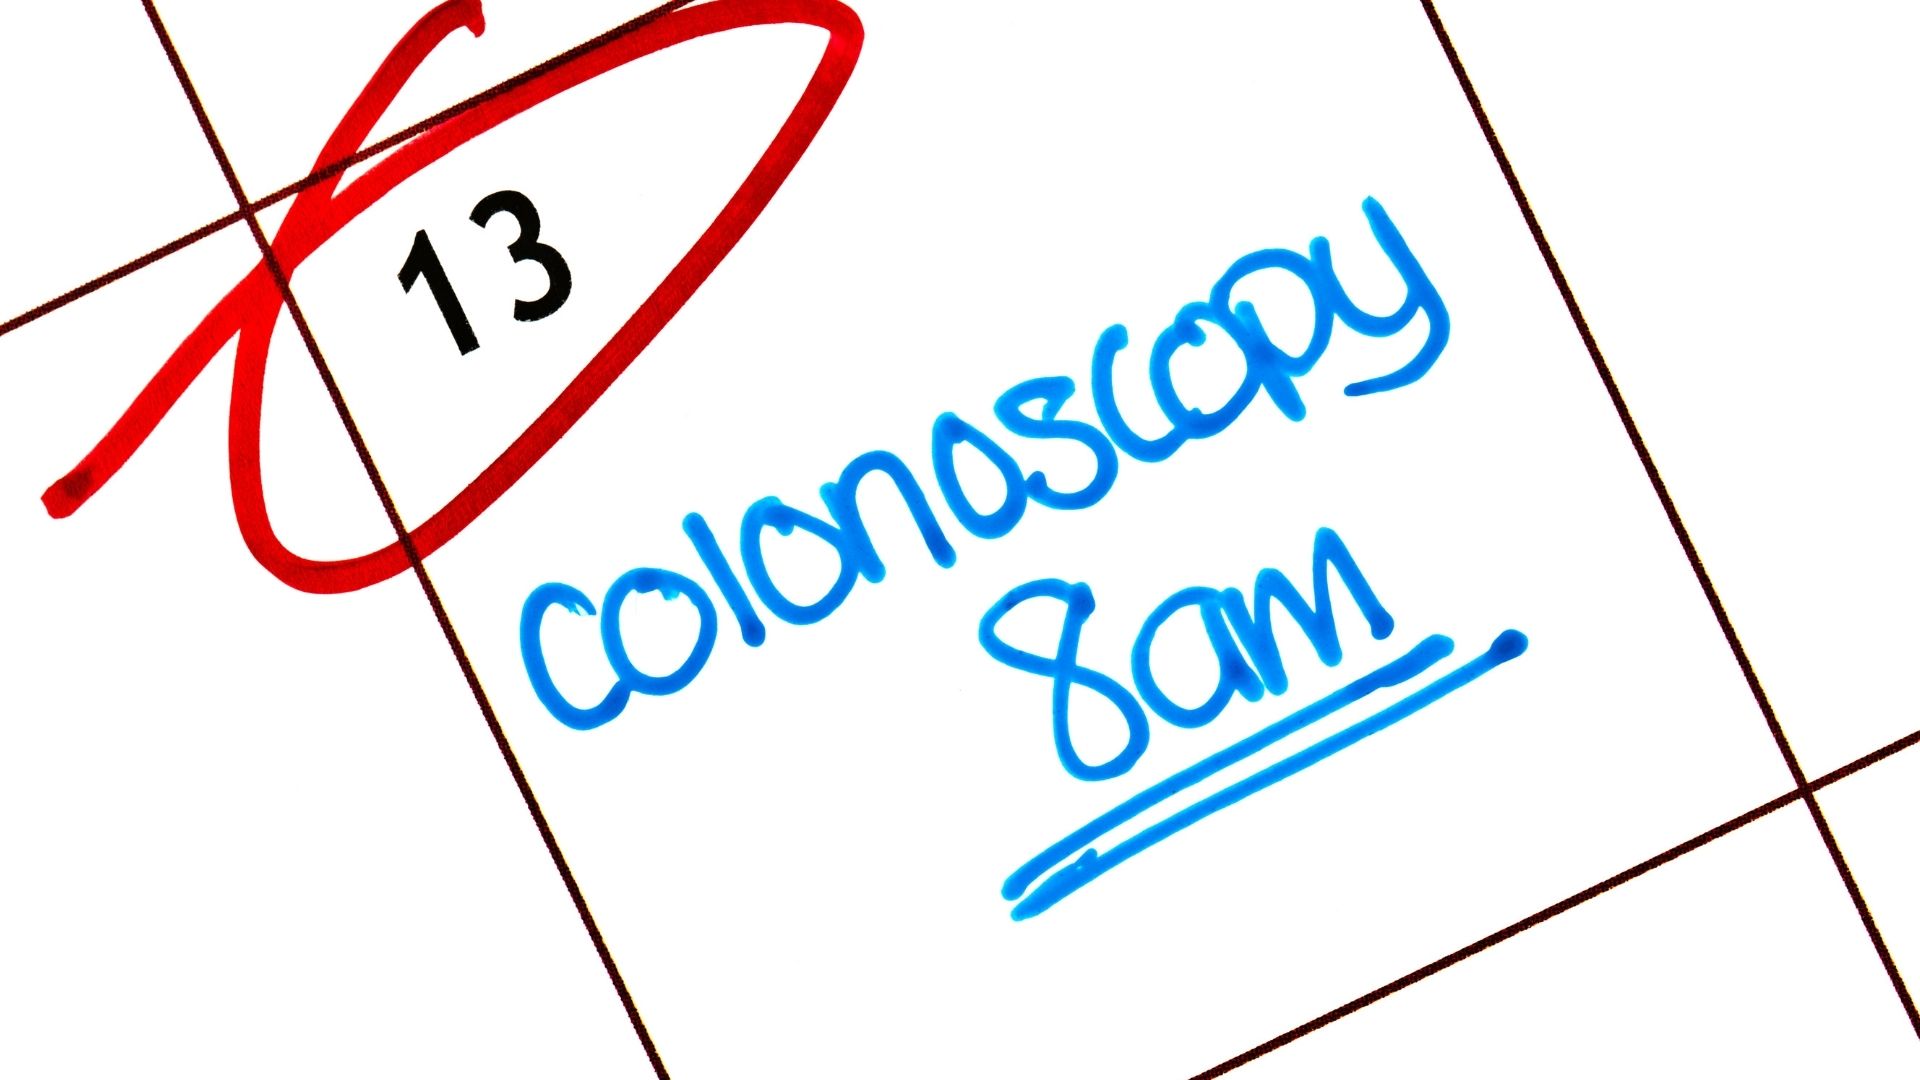 A Colonoscopy Can Save Your Life